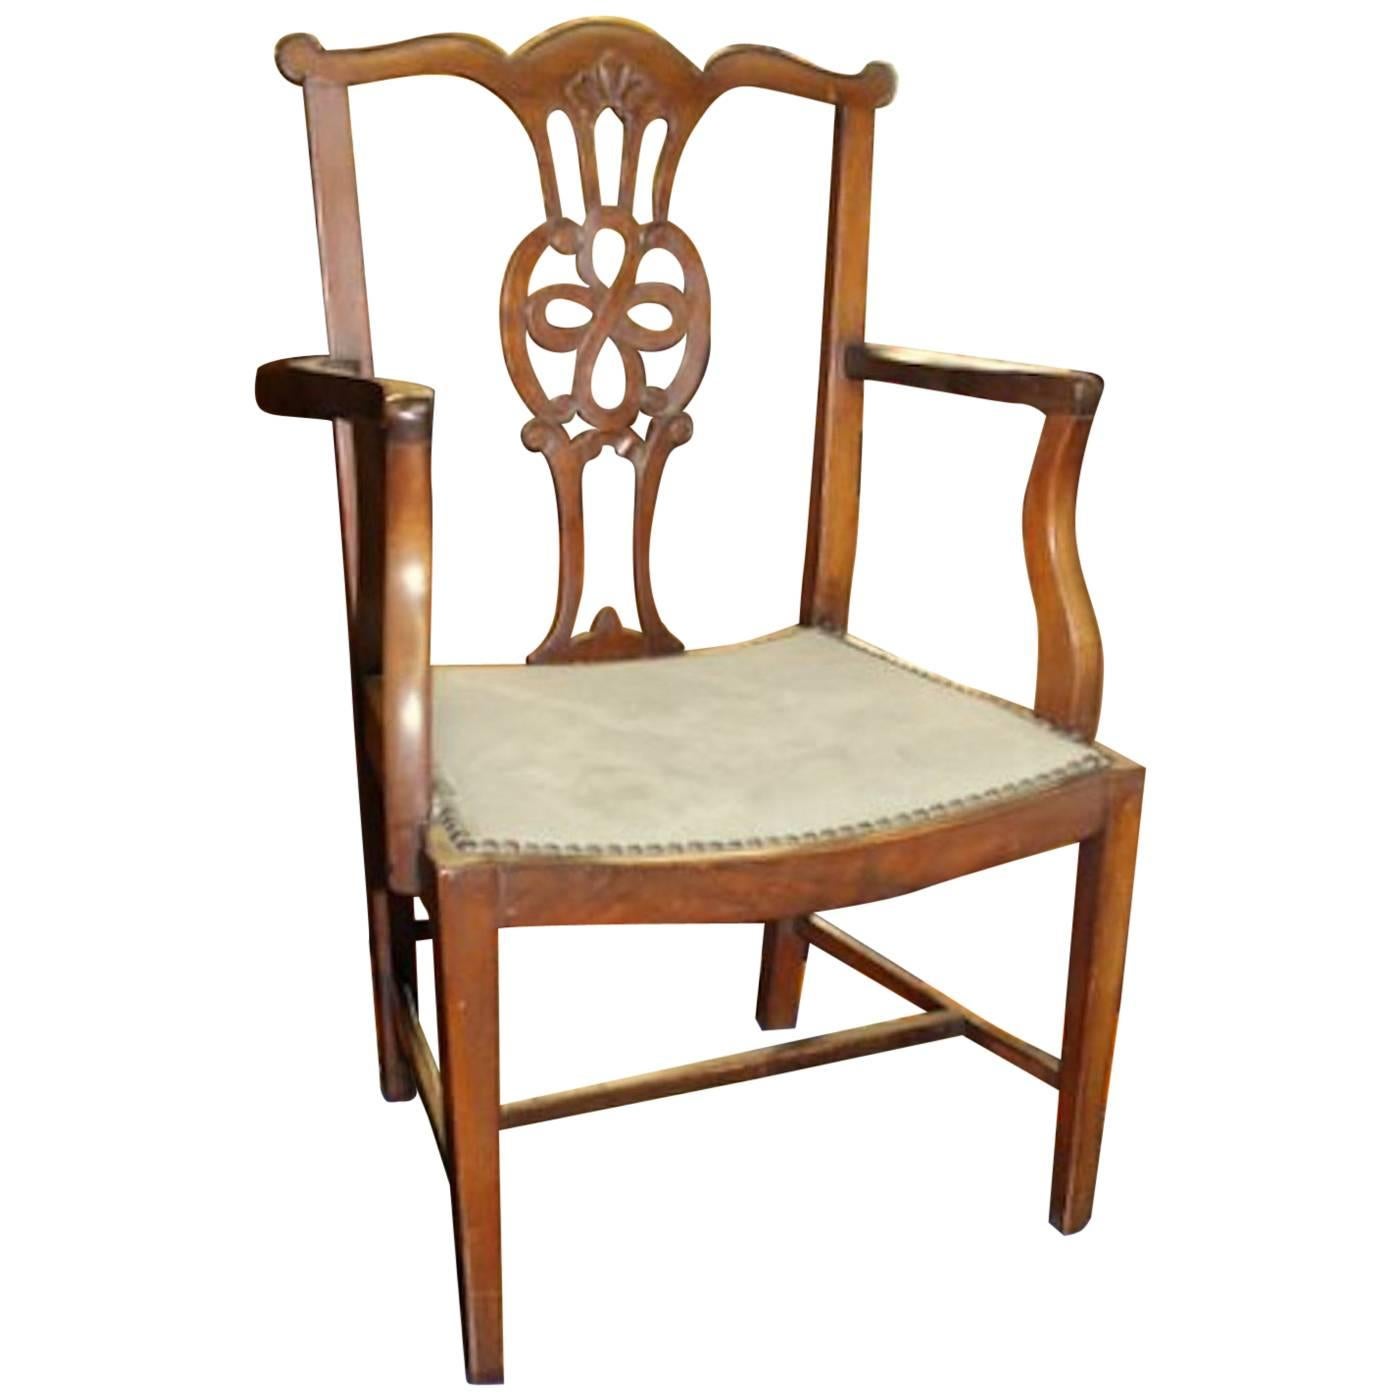 Rare Antique English Mahogany Chippendale Style Child's Chair